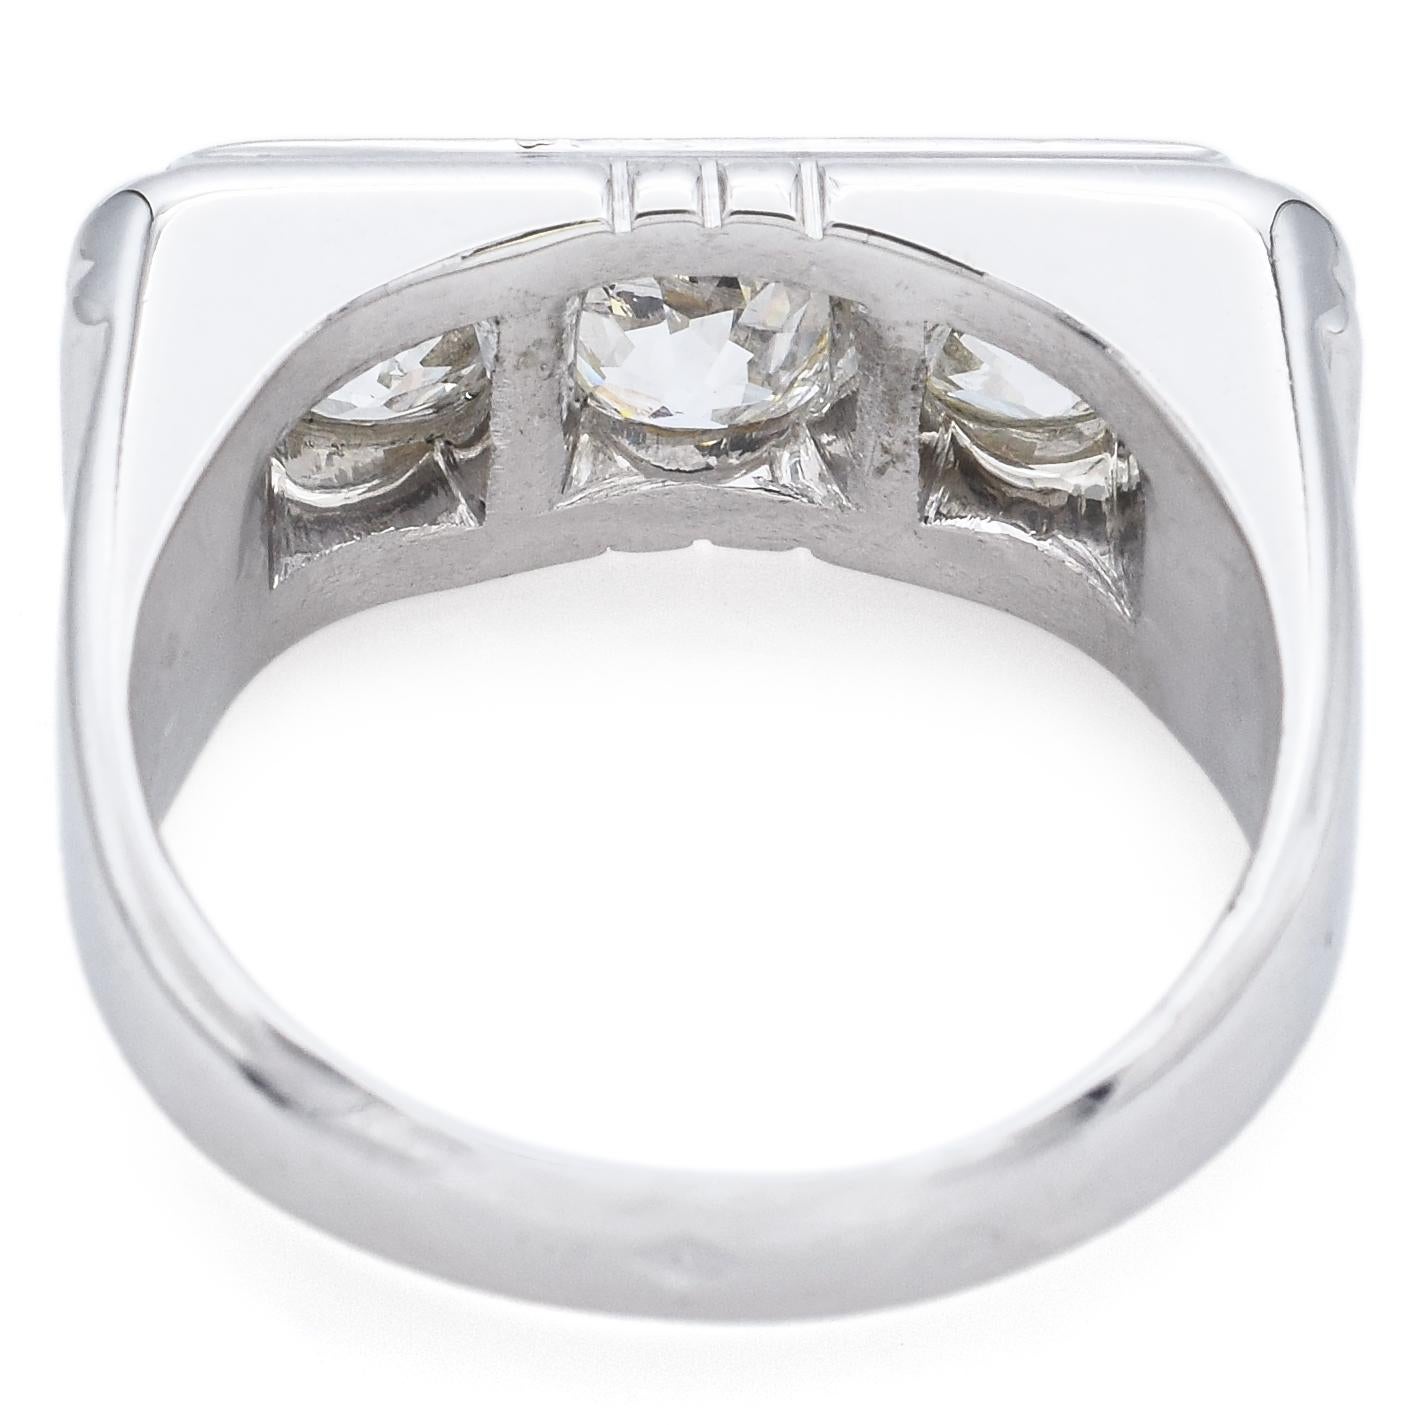 Vintage French Diamond White Gold 1.81 TCW Three-Stone Band Ring Size 7.25 In Good Condition For Sale In New York, NY